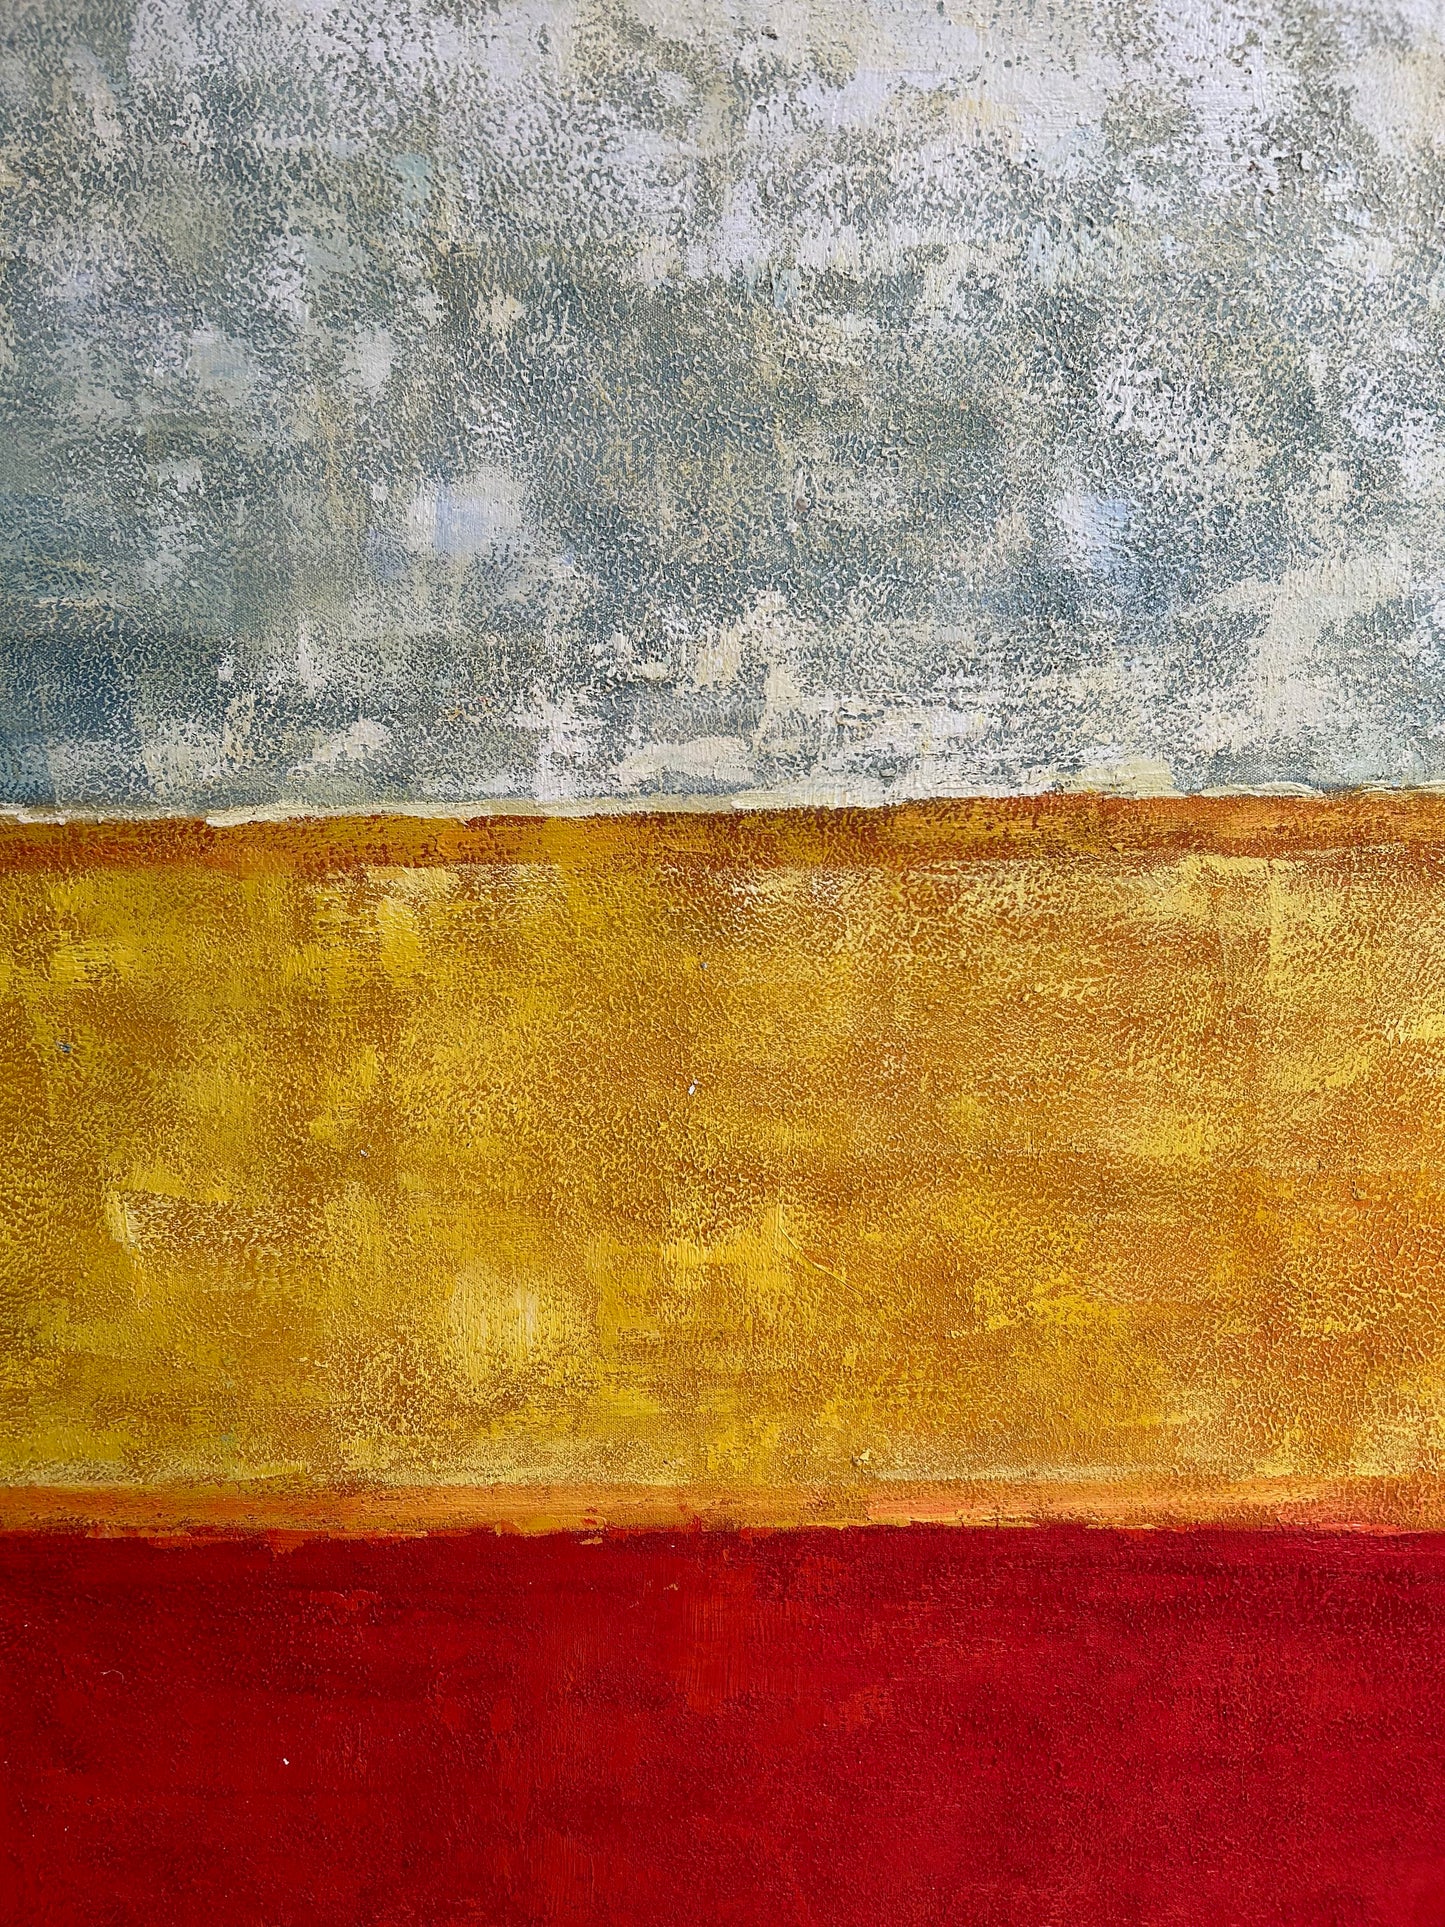 Colourful Abstract in the style of Mark Rothko